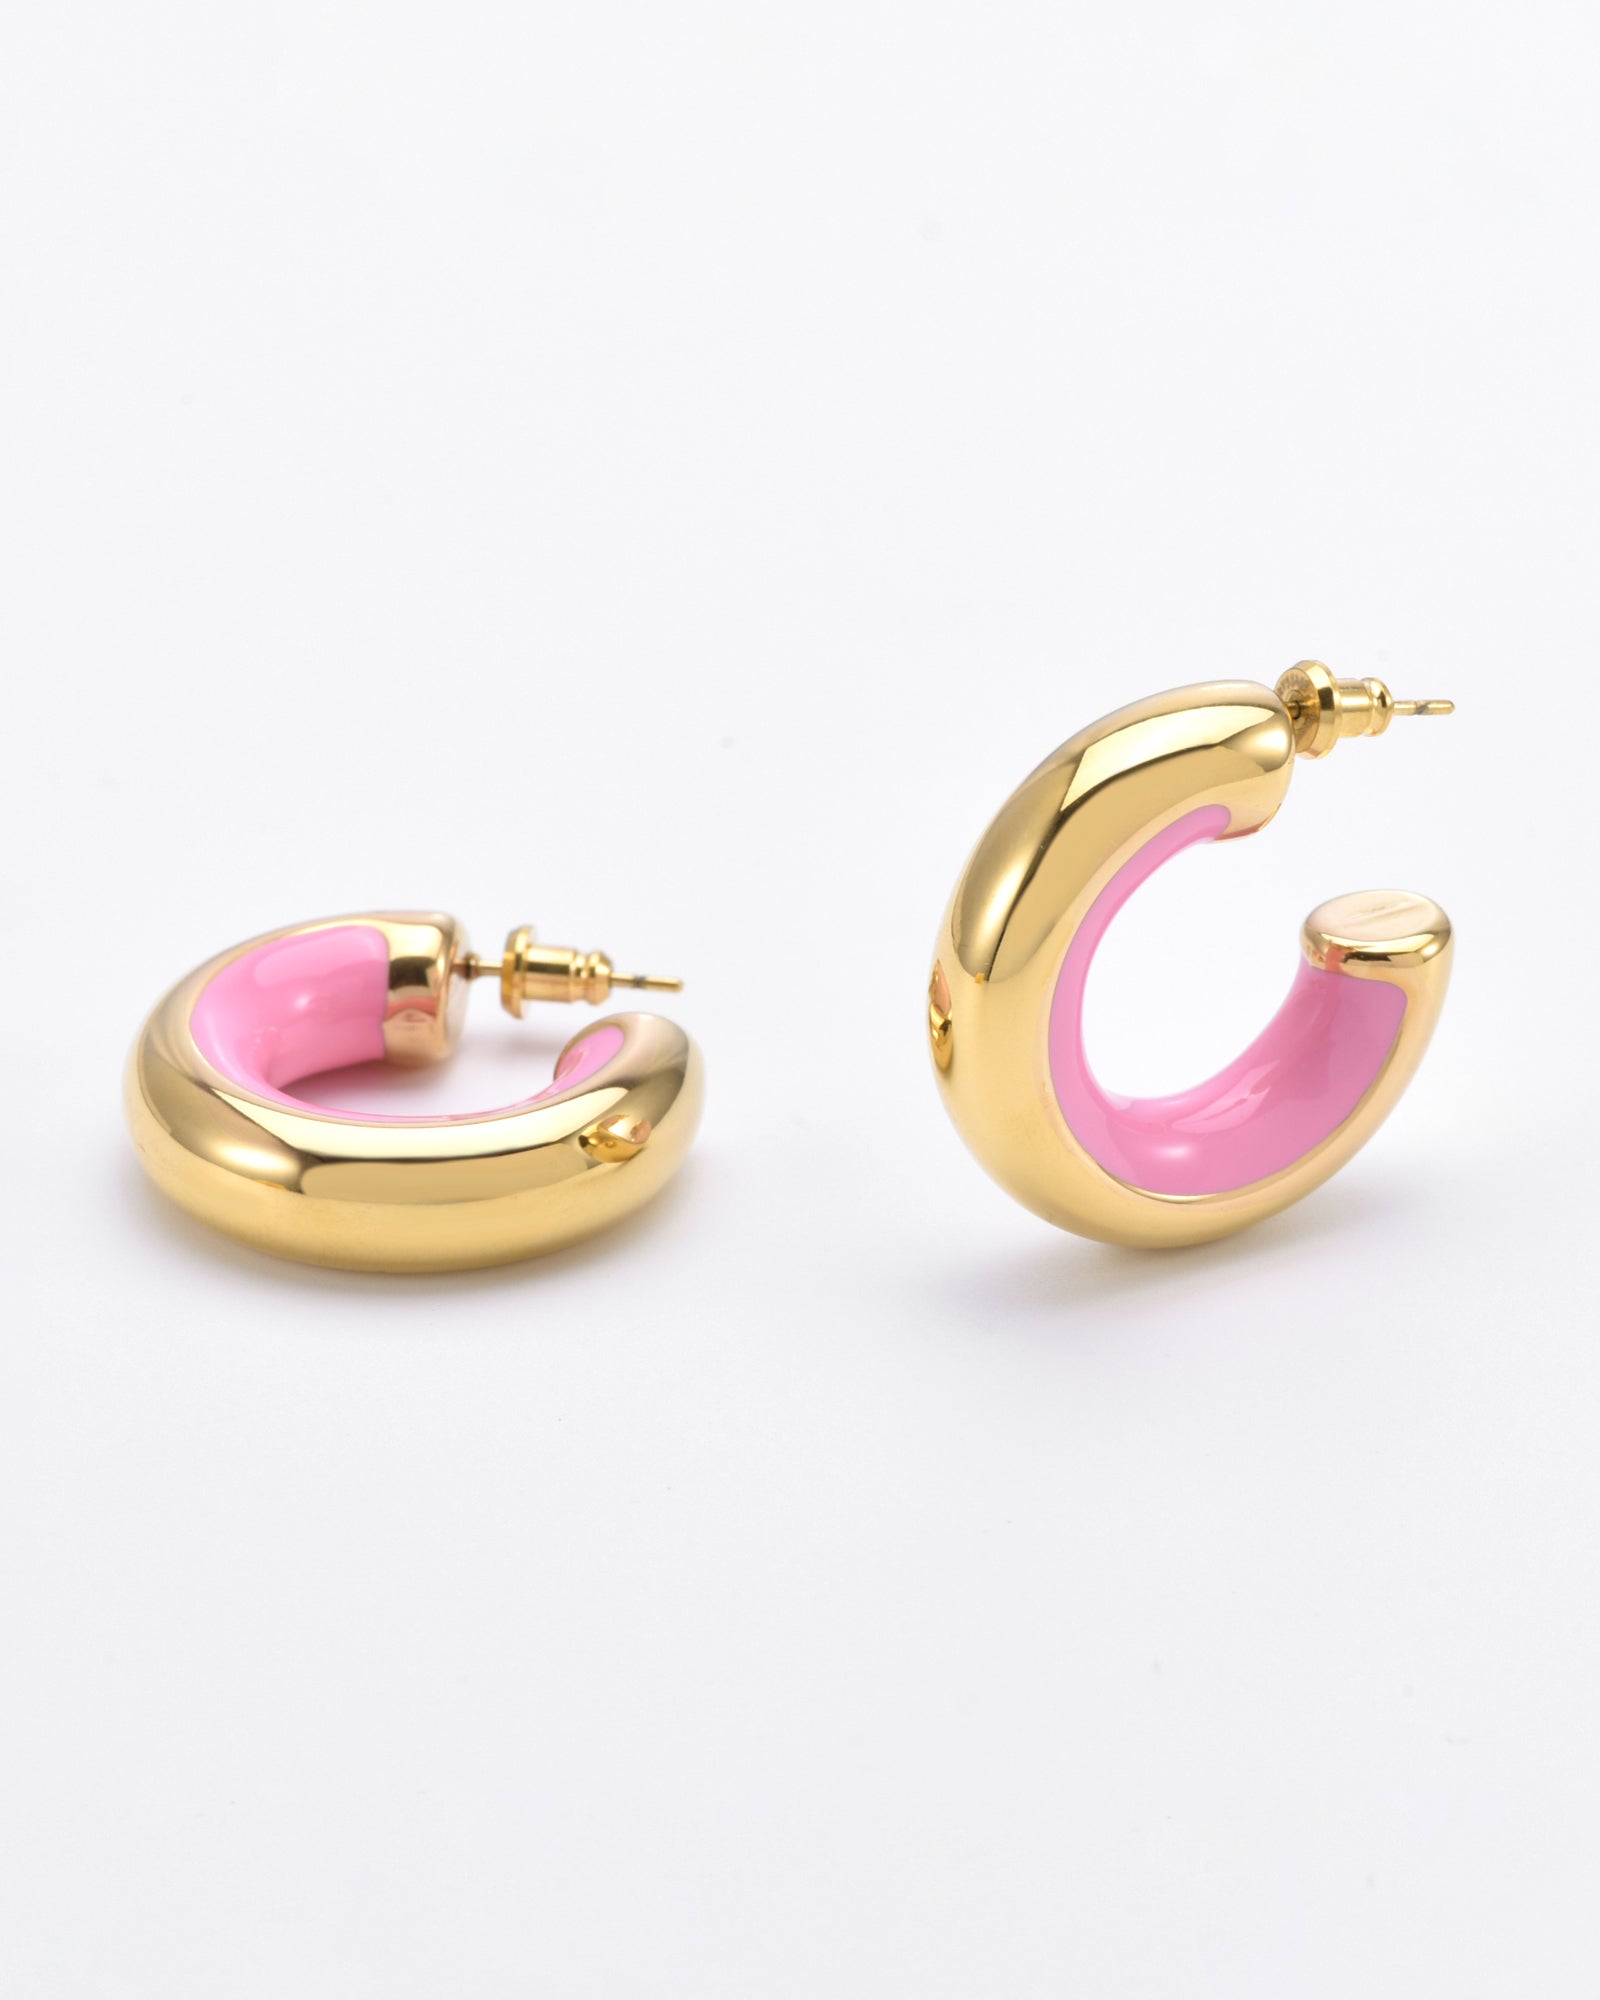 A pair of 24-karat gold-plated hoop earrings with a thick, rounded design. The exterior is gold, while the interior features shiny pink hand-painted enamel. The Lotus Earrings Pink by For Art's Sake® have post and clasp closures and are positioned on a plain white background.